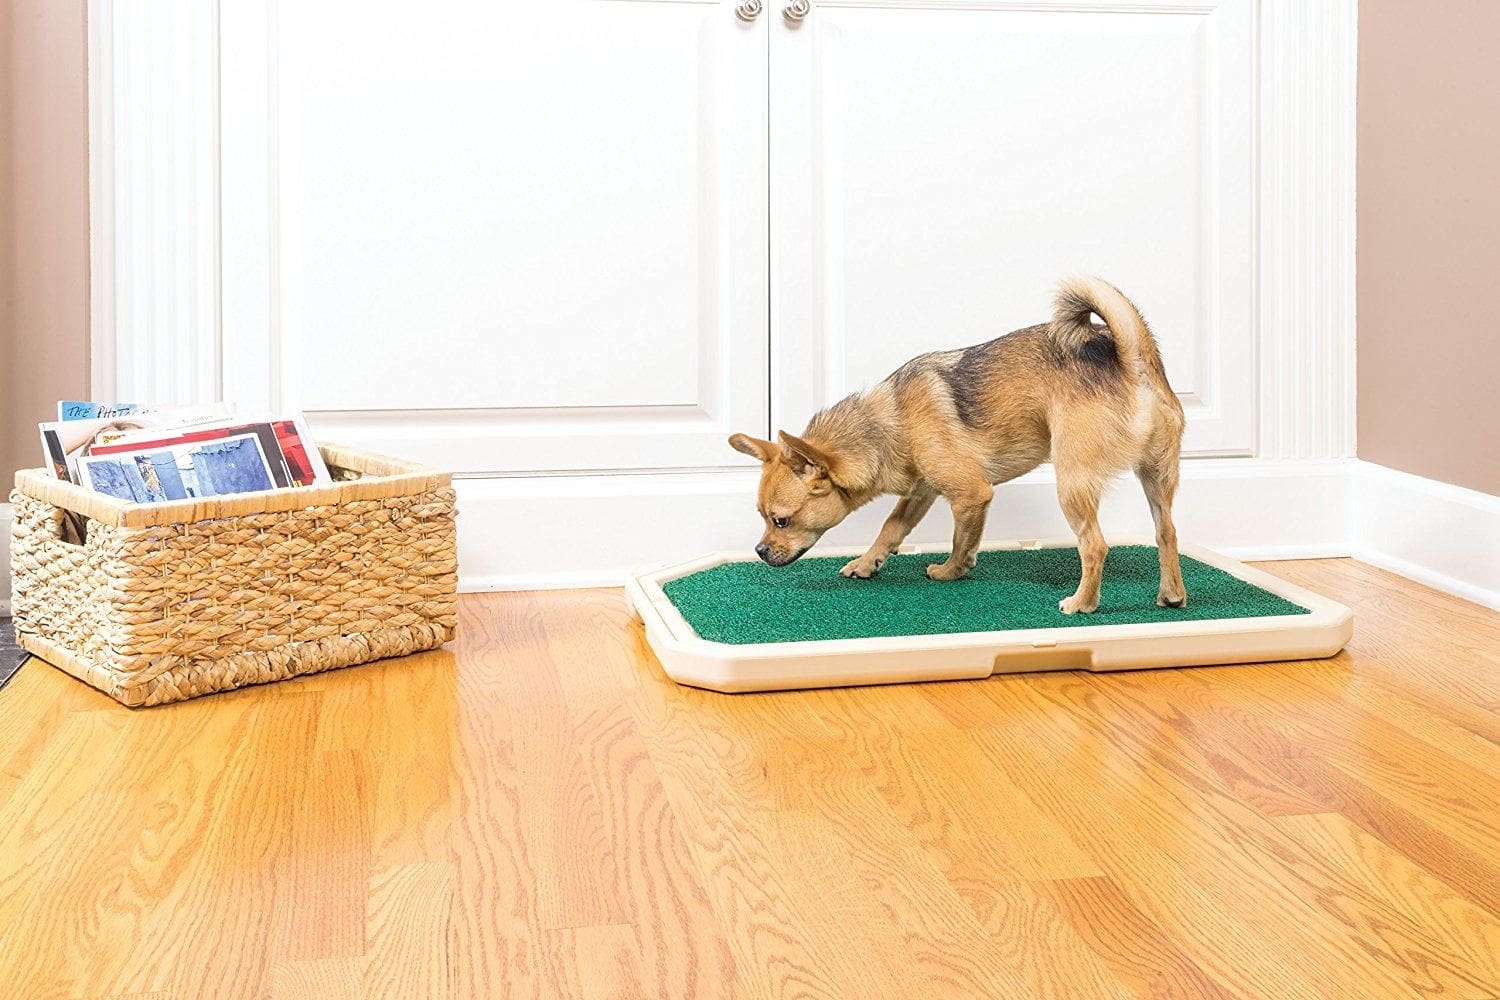 How to Potty Train Your Dog Where to Start